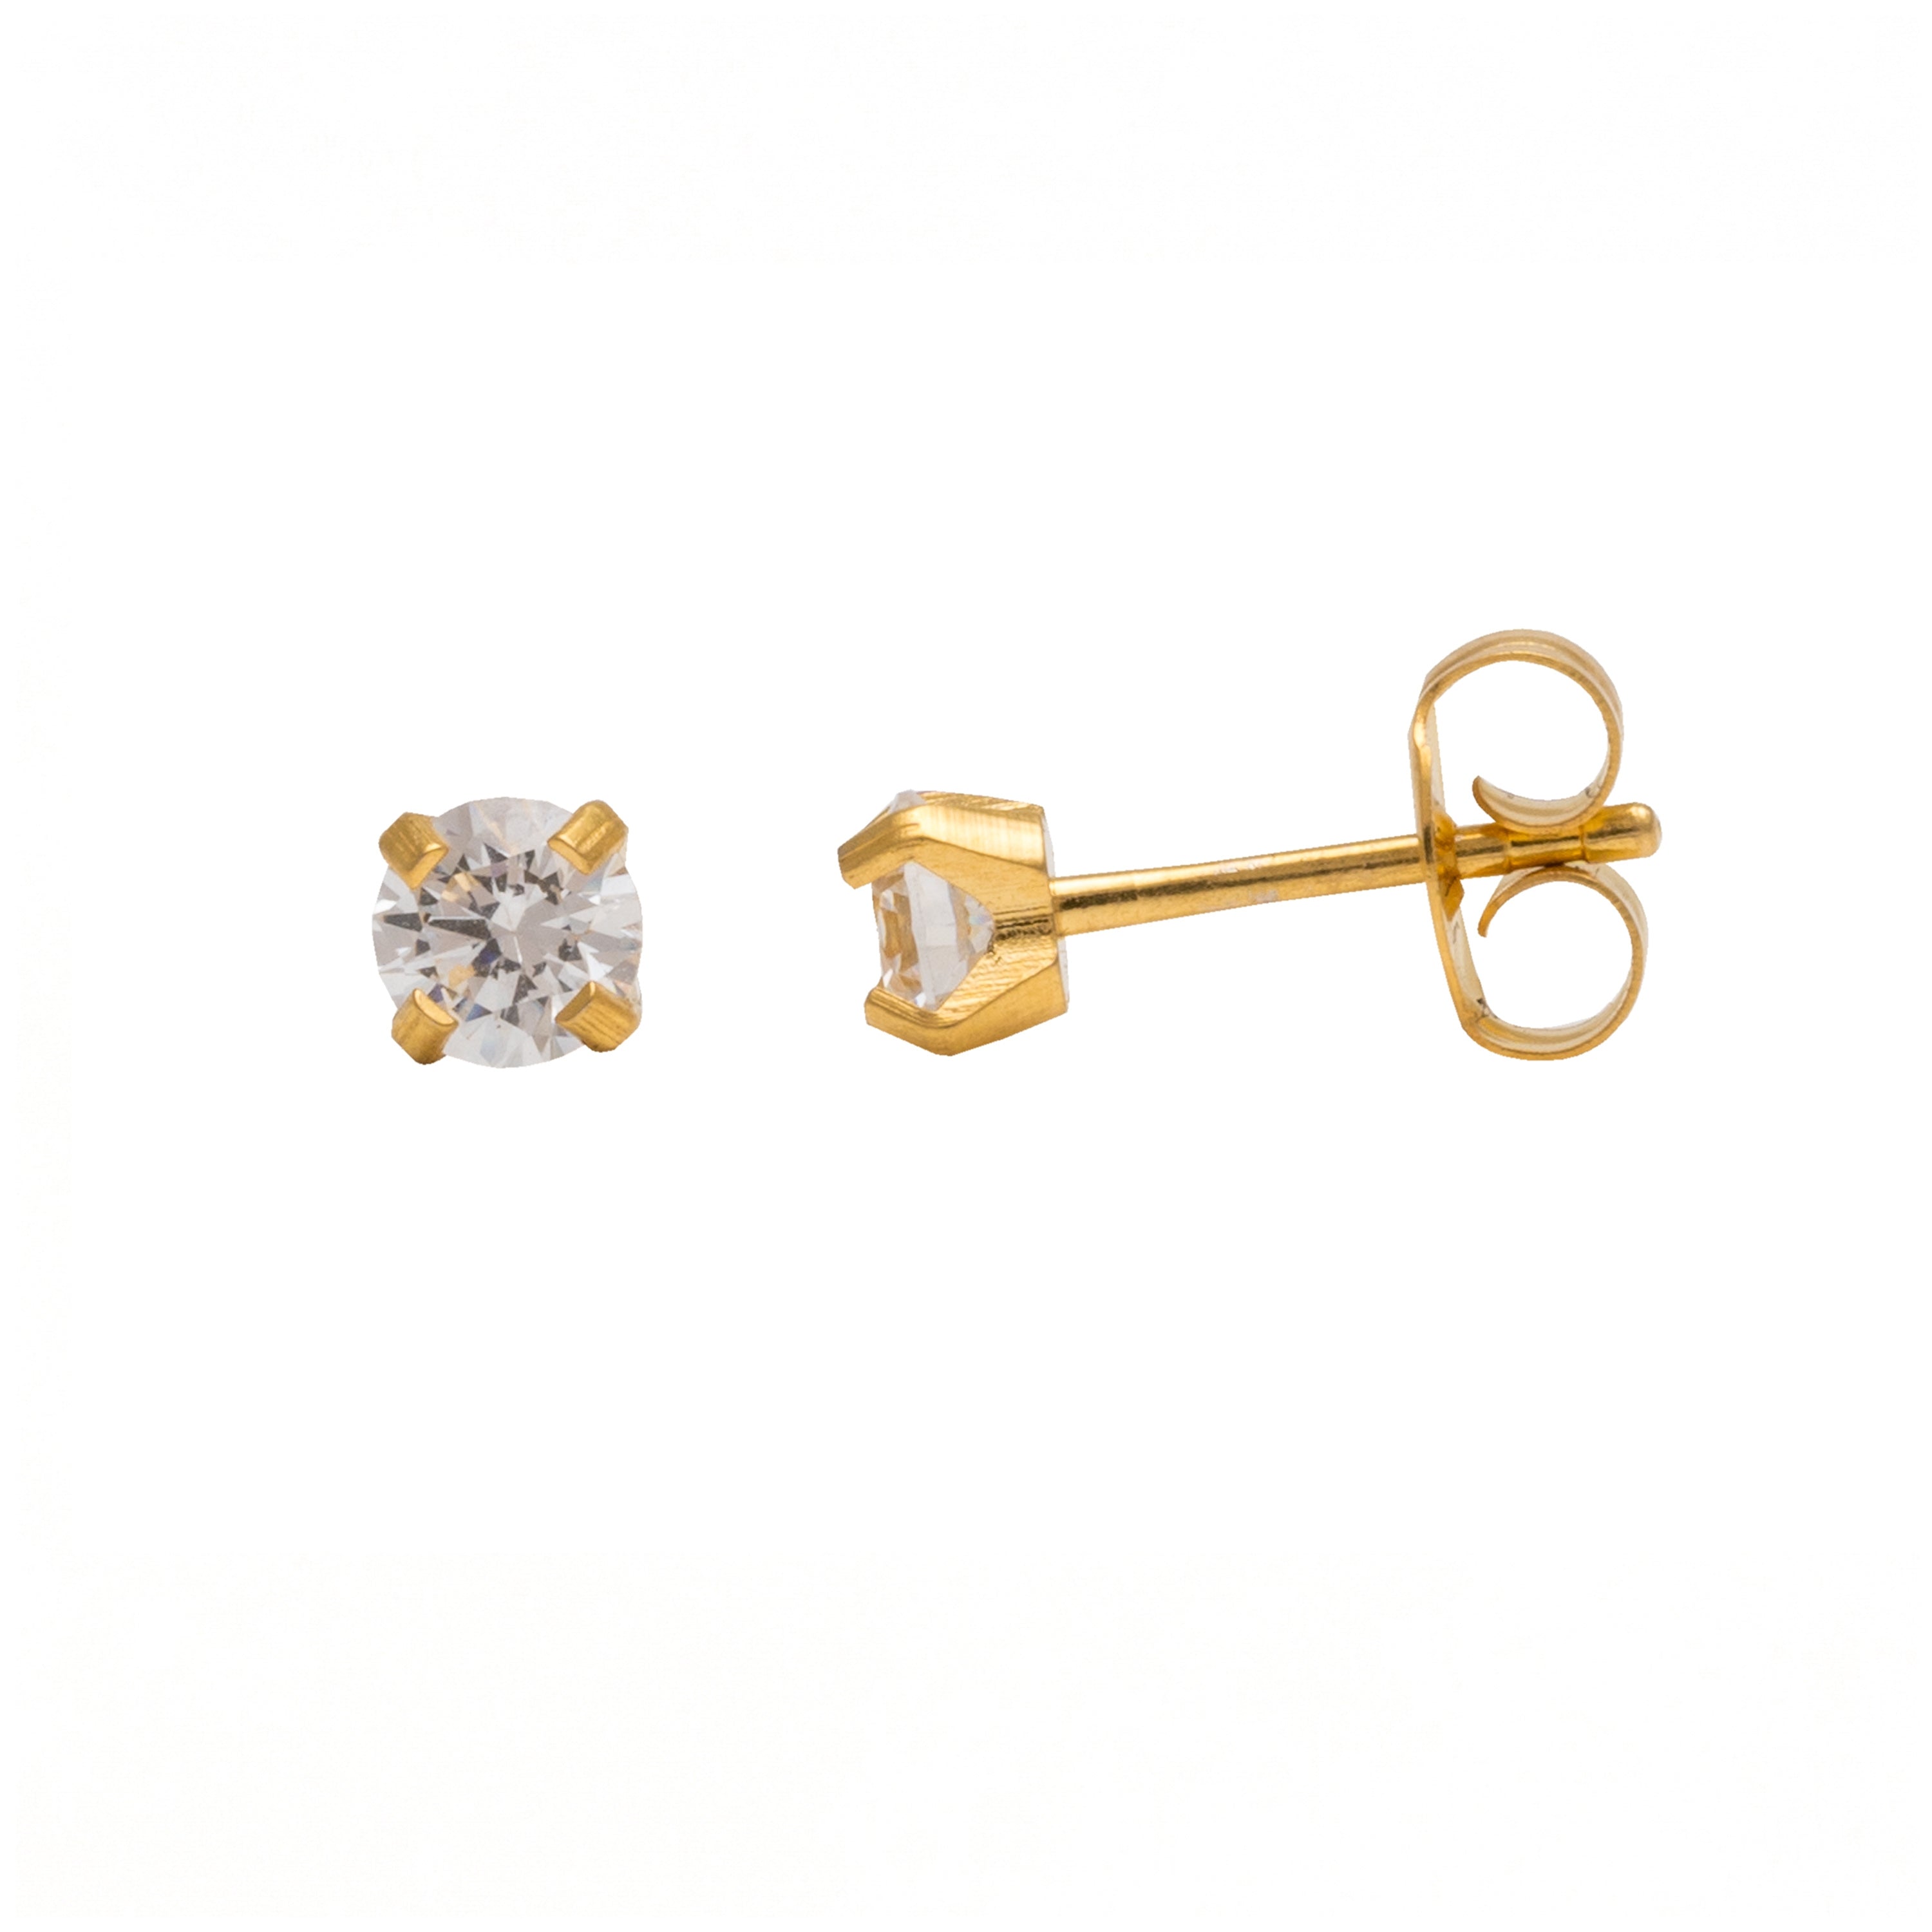 4MM Cubic Zirconia 24K Pure Gold Plated Ear Studs | MADE IN USA | Ideal for everyday wear